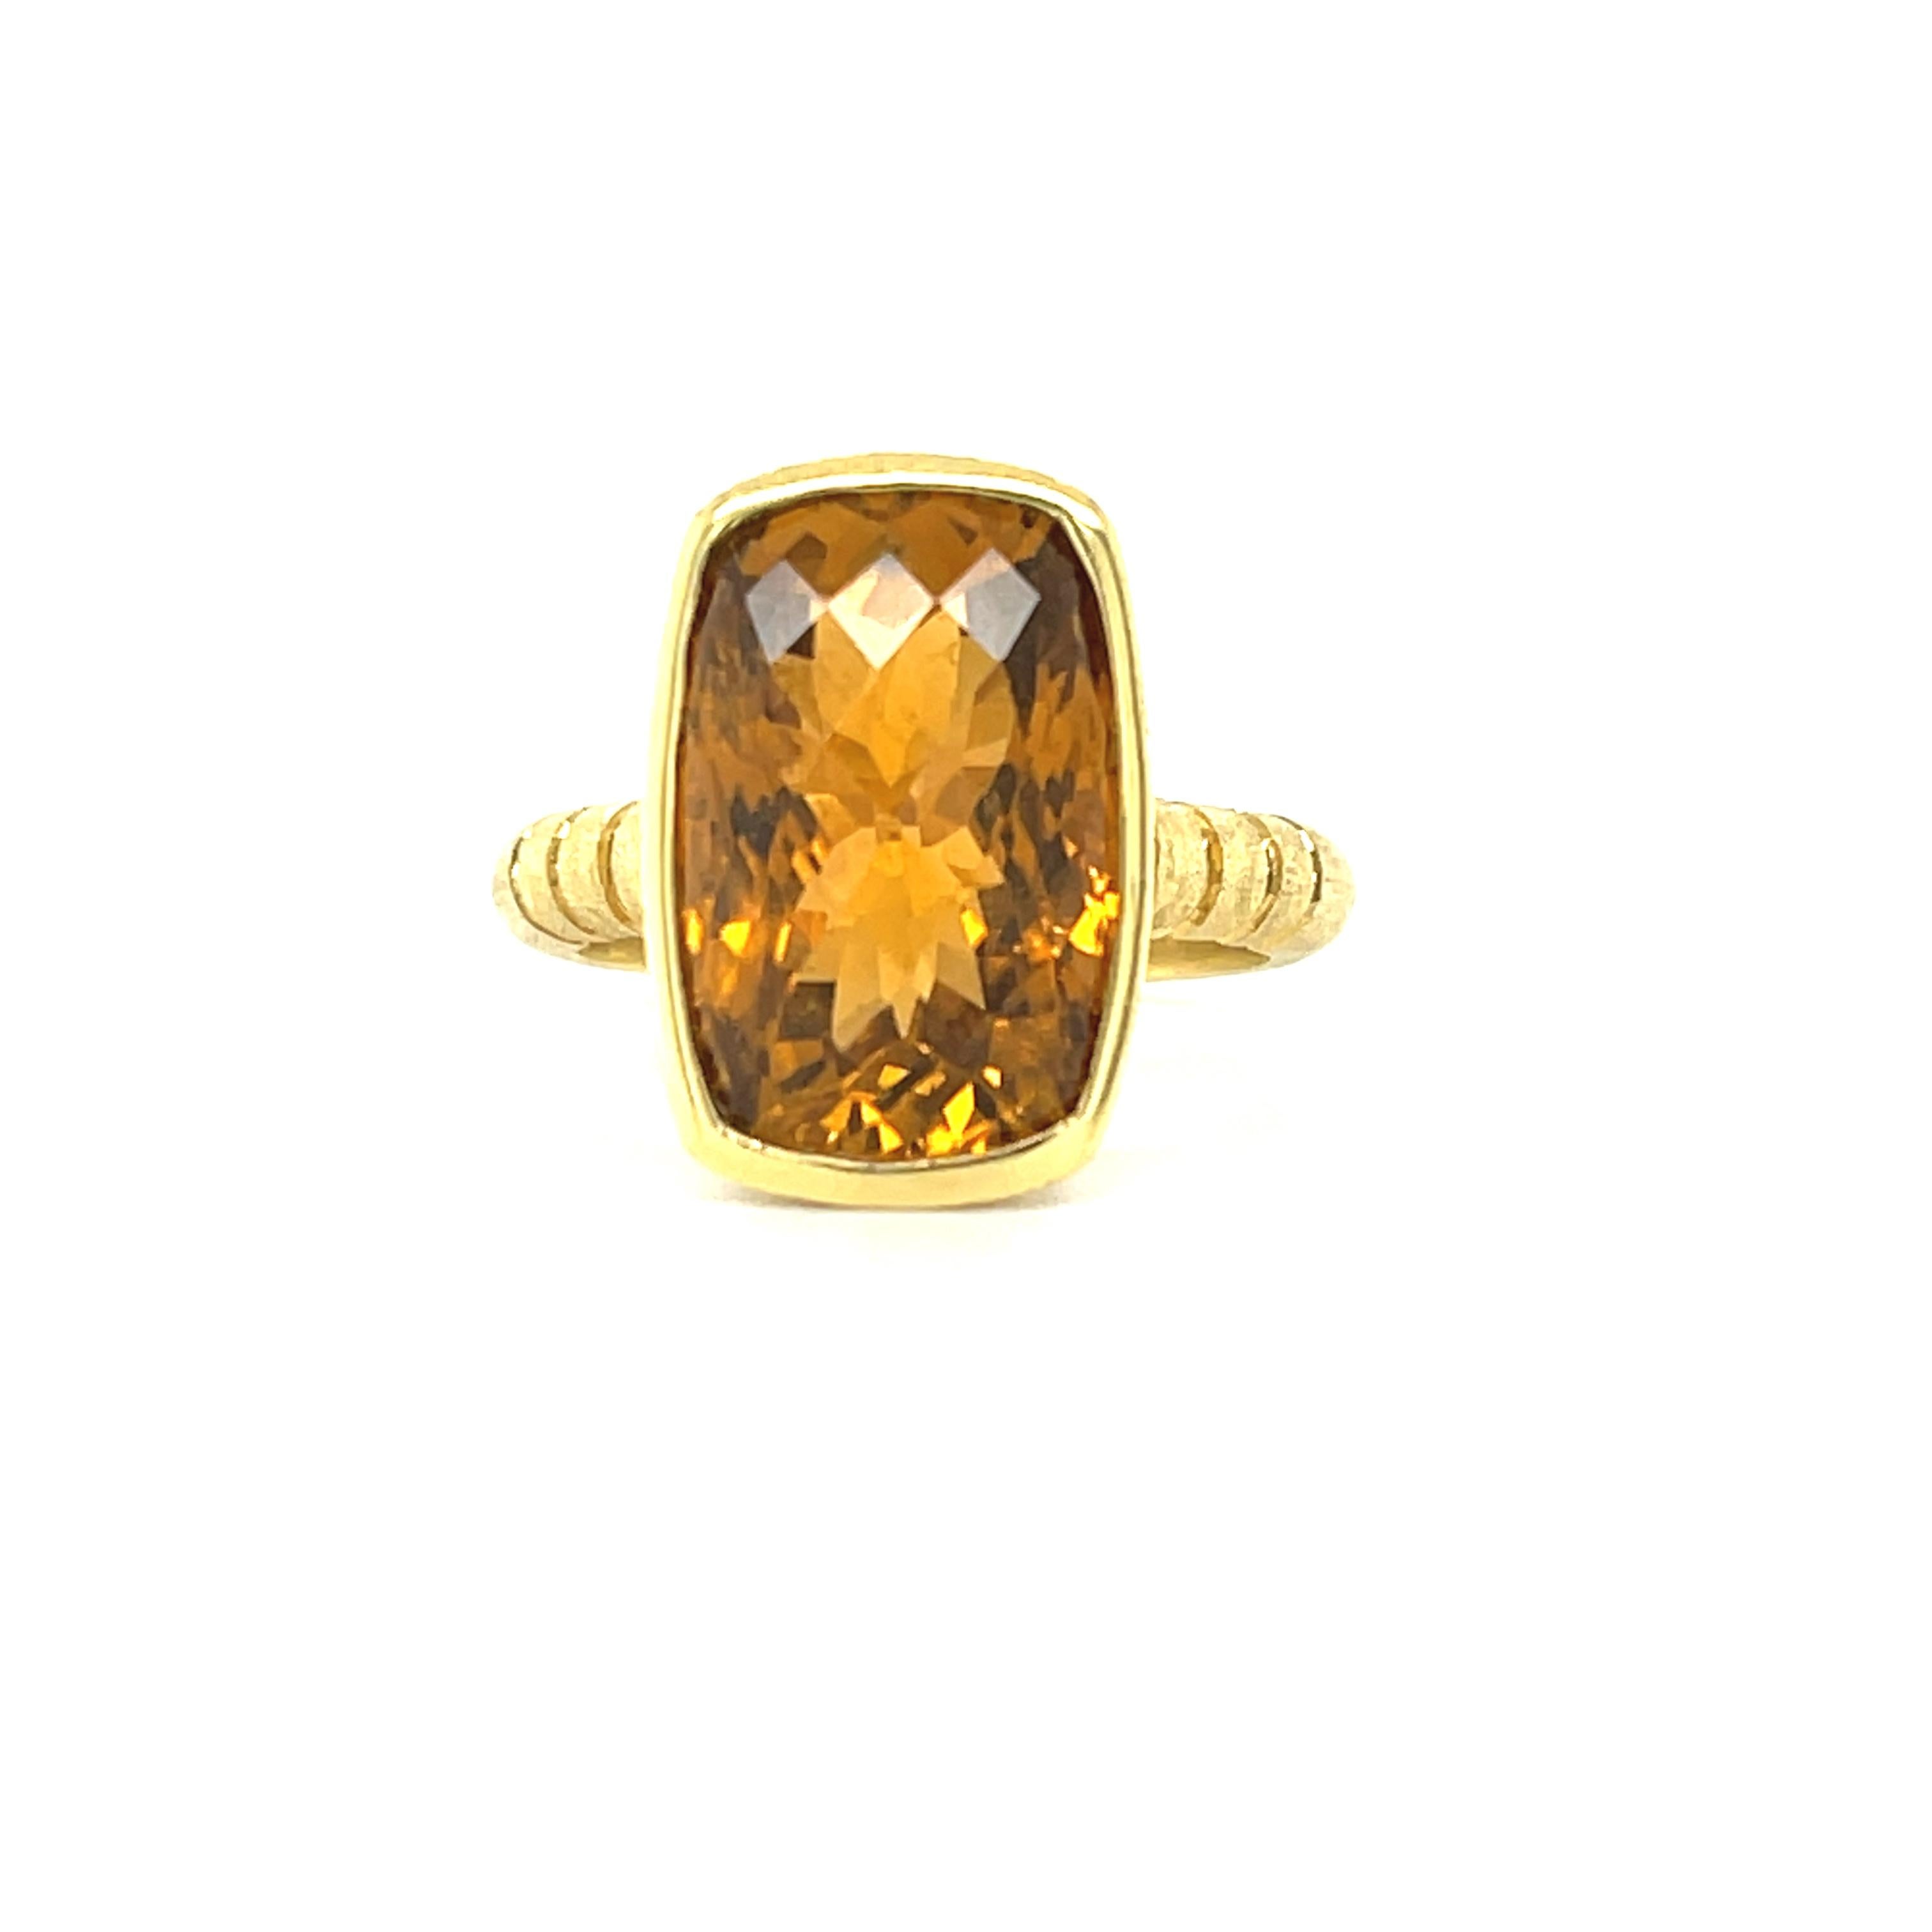 This elegant and sophisticated ring was custom-made in 18k yellow gold to showcase a beautiful 8.24 carat golden tourmaline. The center gemstone is a cushion-shape, whose crown has been faceted with a fancy checkerboard pattern for exceptional